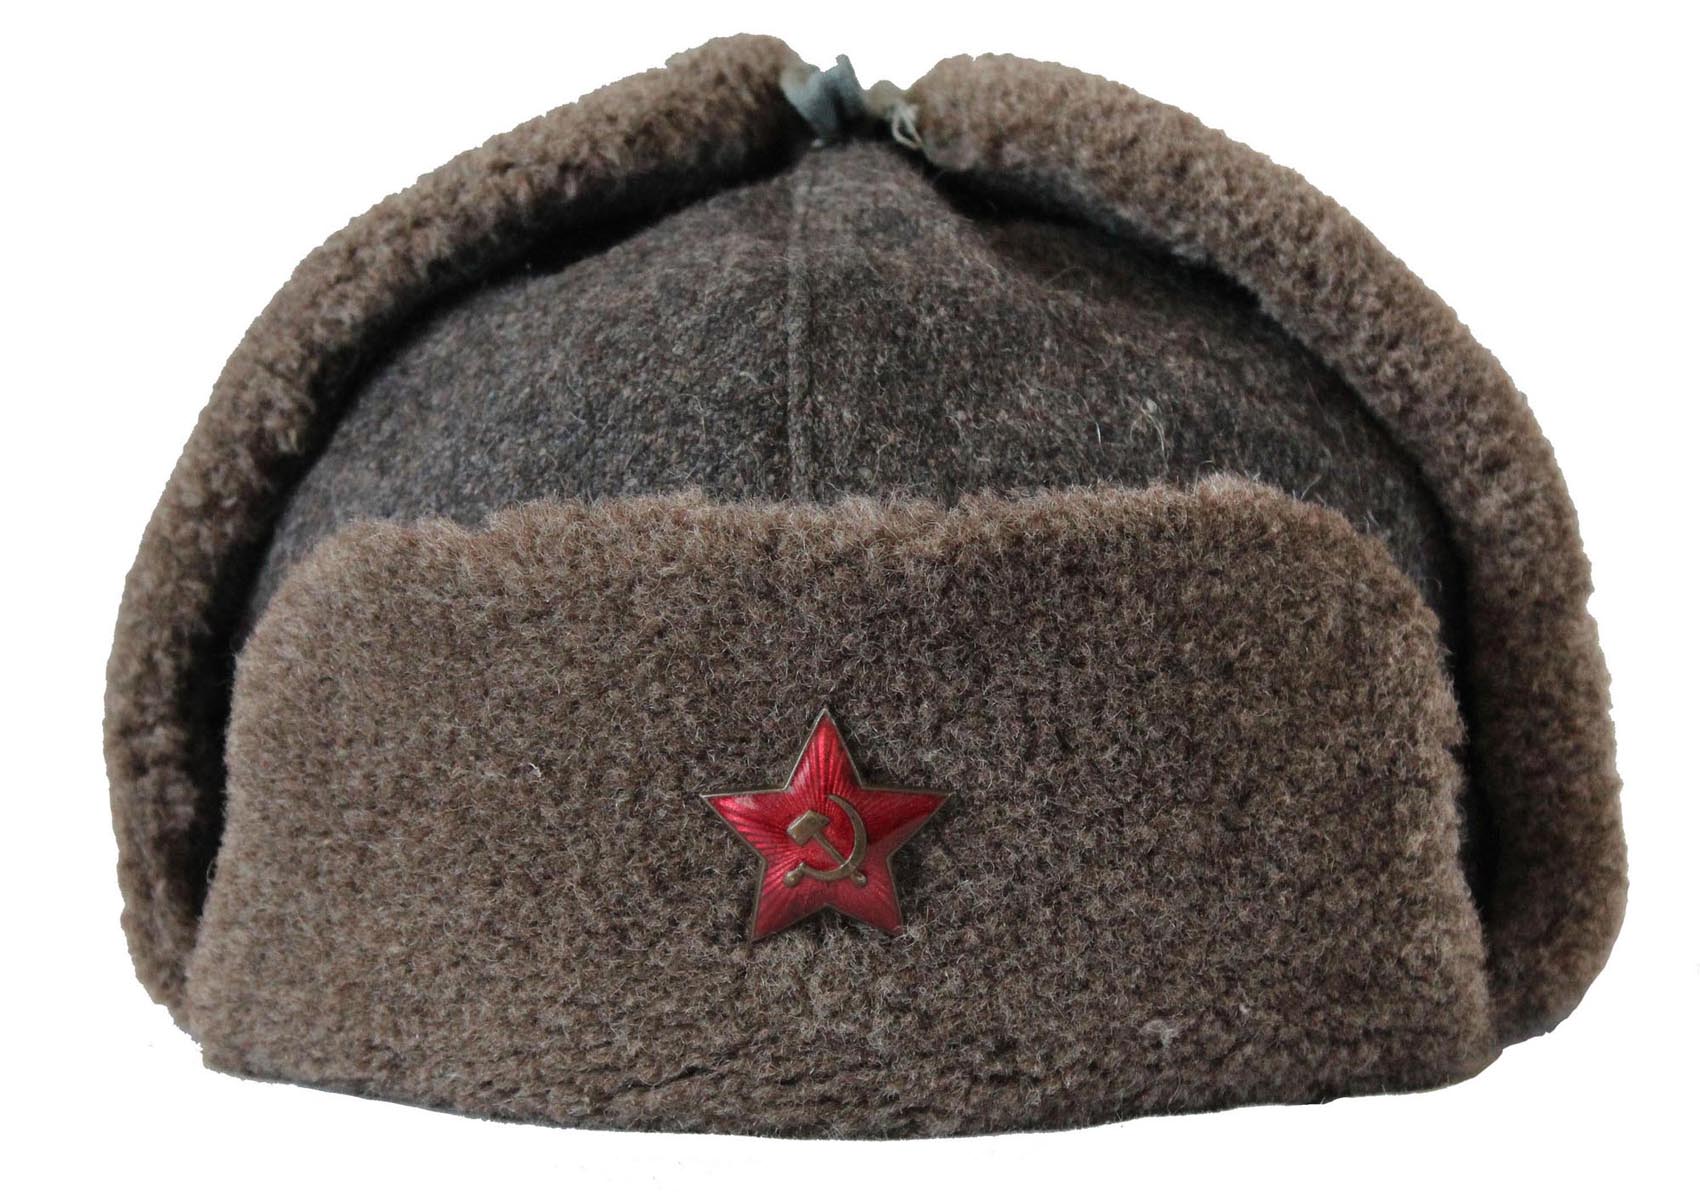 Russian Soldier With Ushanka